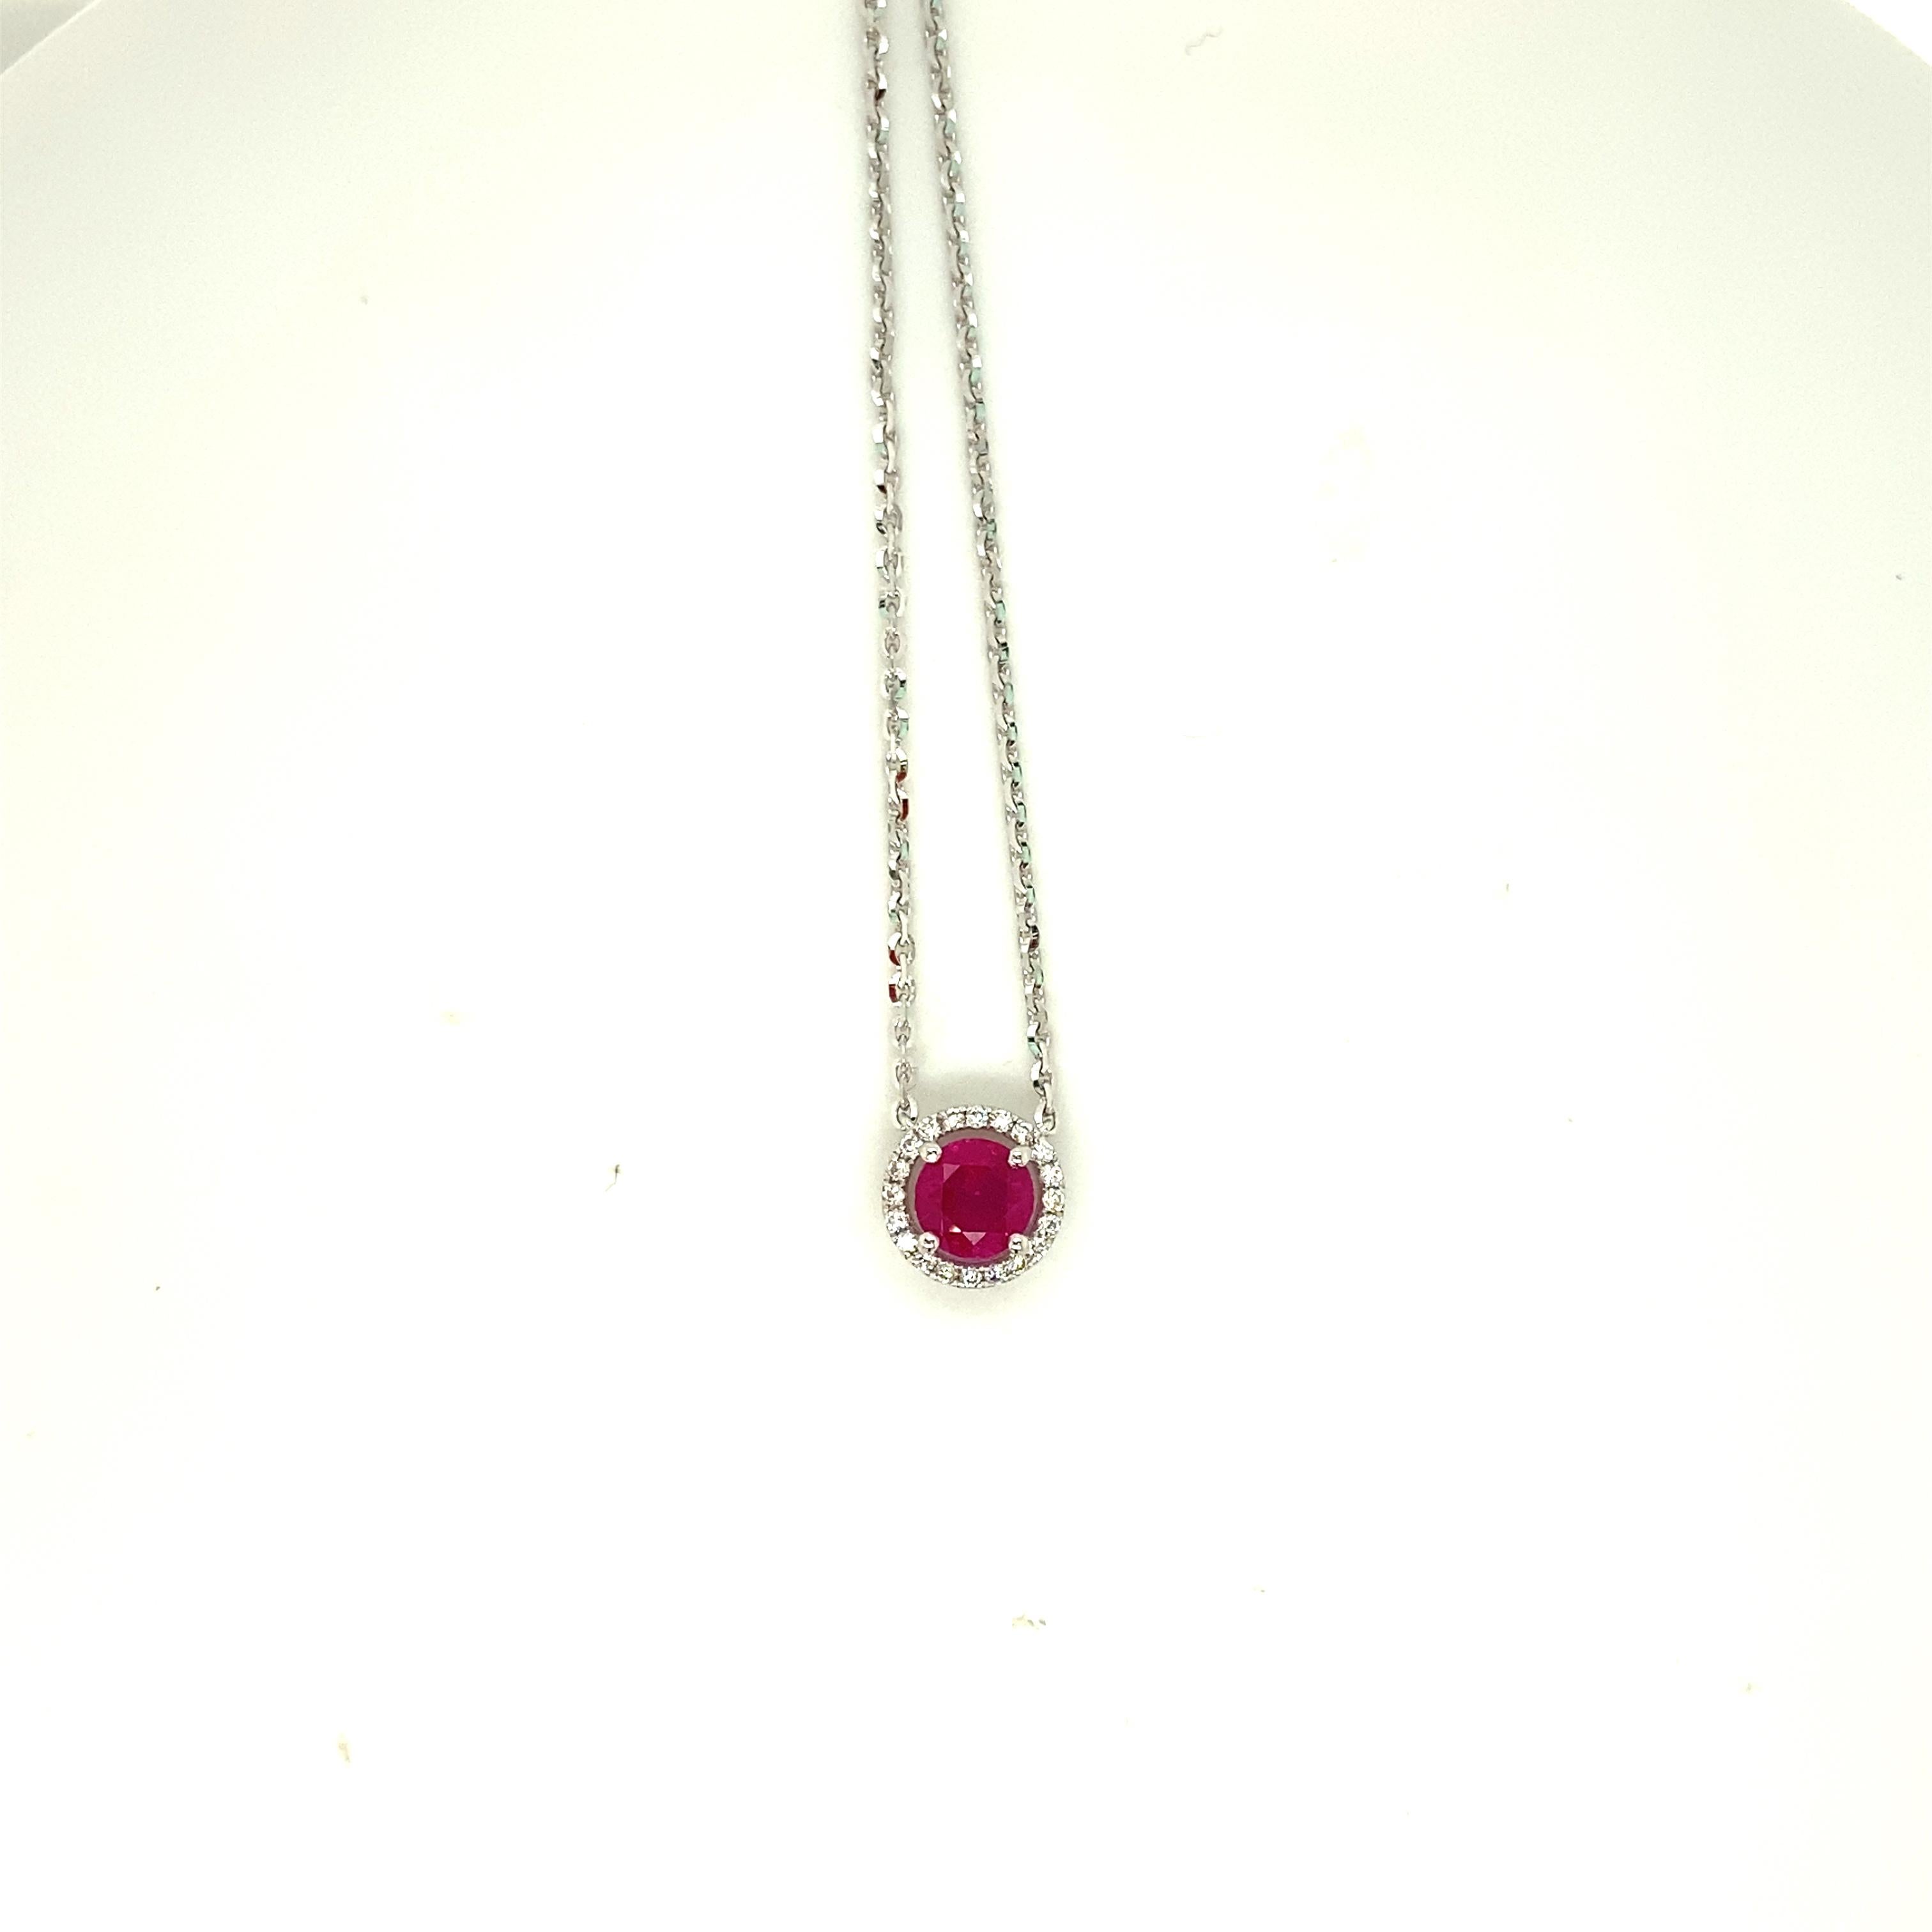 Oval Cut 1.16 Carat Round-Cut Intense Ruby and Diamond Pendant Necklace For Sale